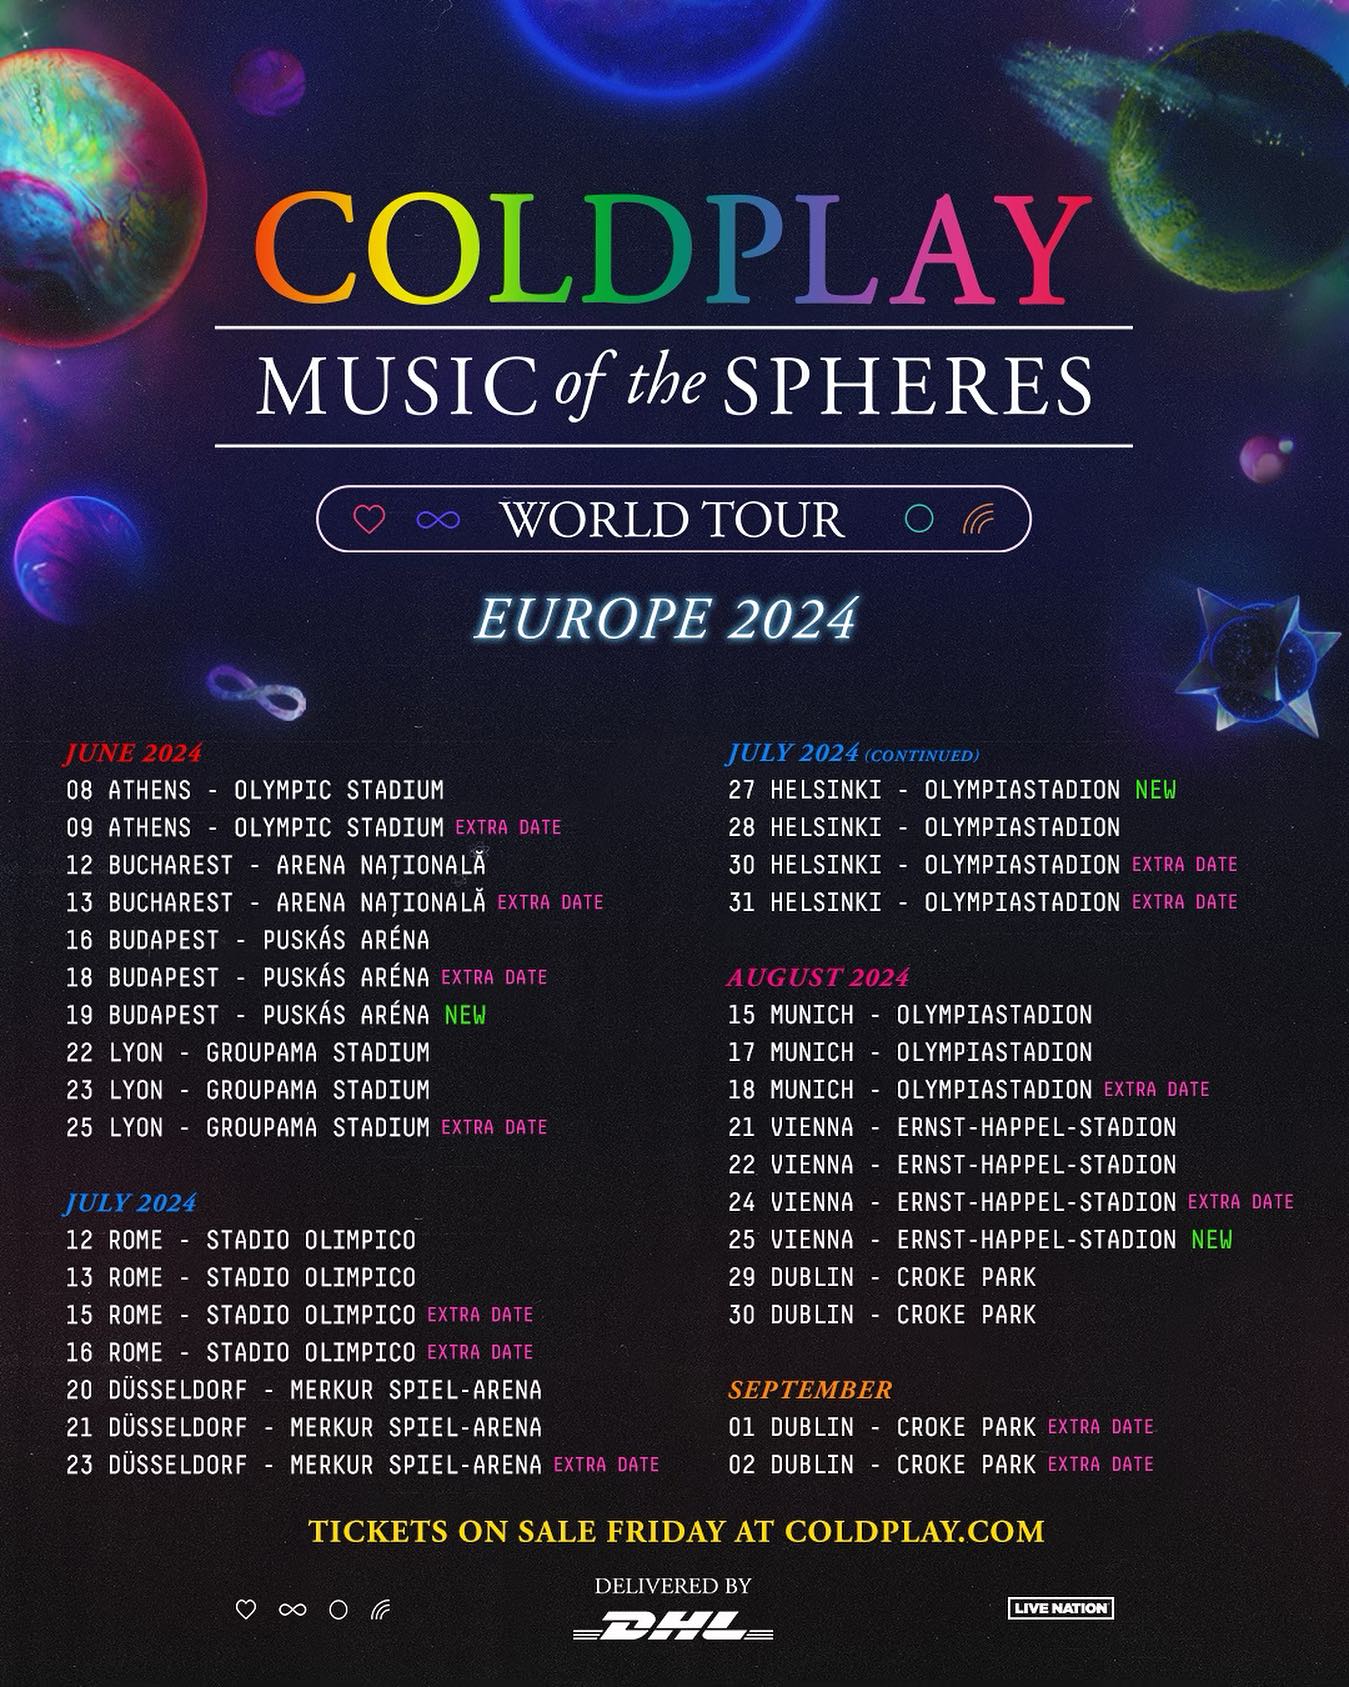 Coldplay - Music of the Spheres Tour - Europe 2024